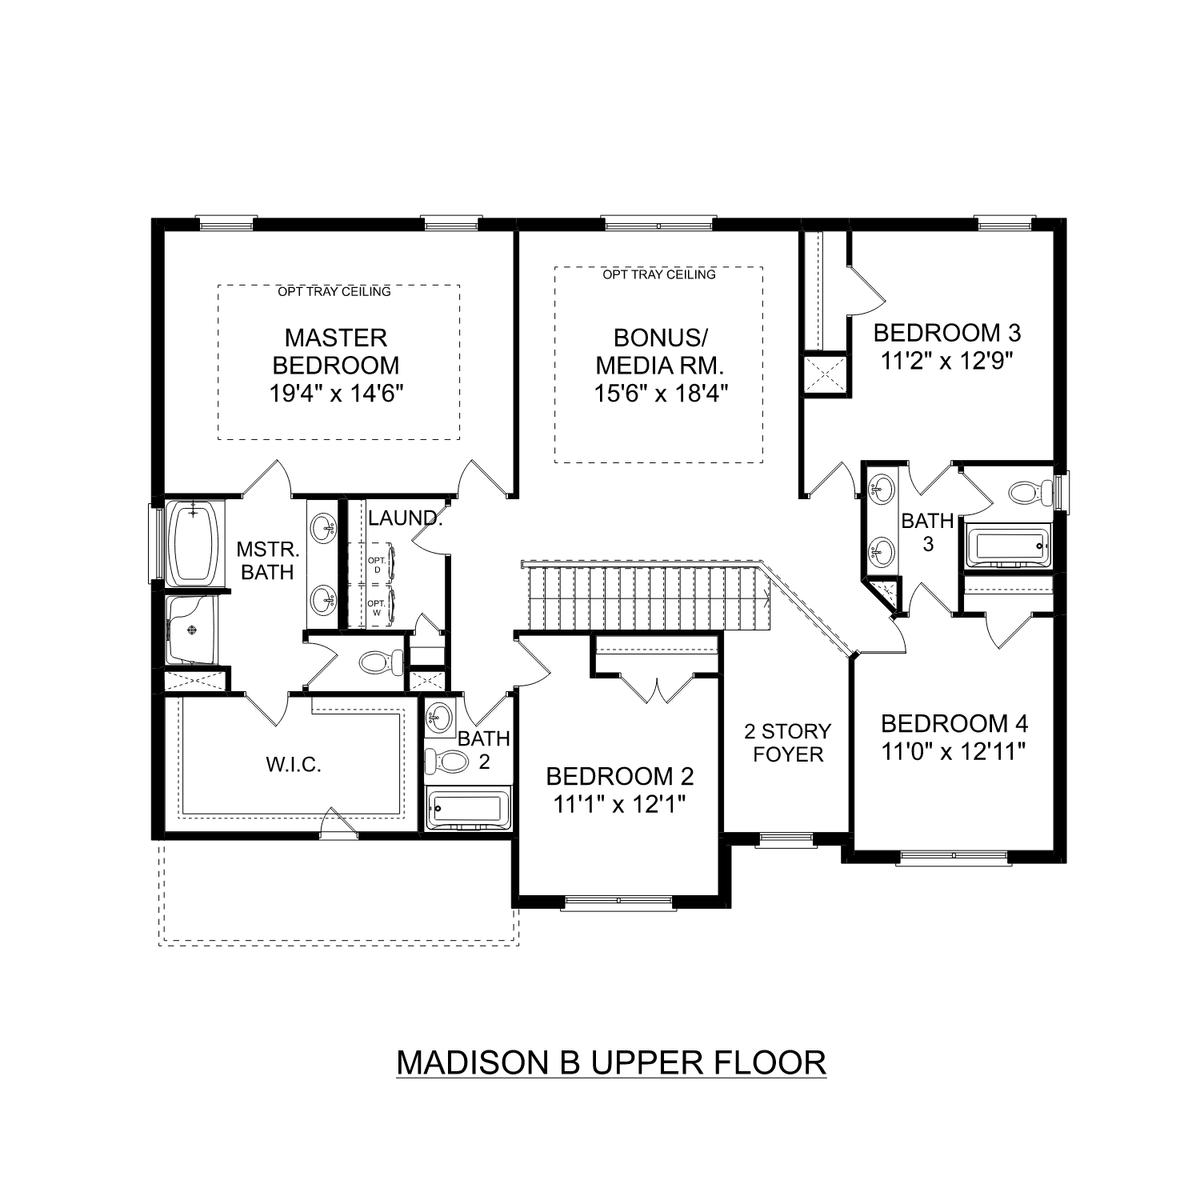 2 - The Madison B floor plan layout for 109 Scout Drive in Davidson Homes' Barnett's Crossing community.